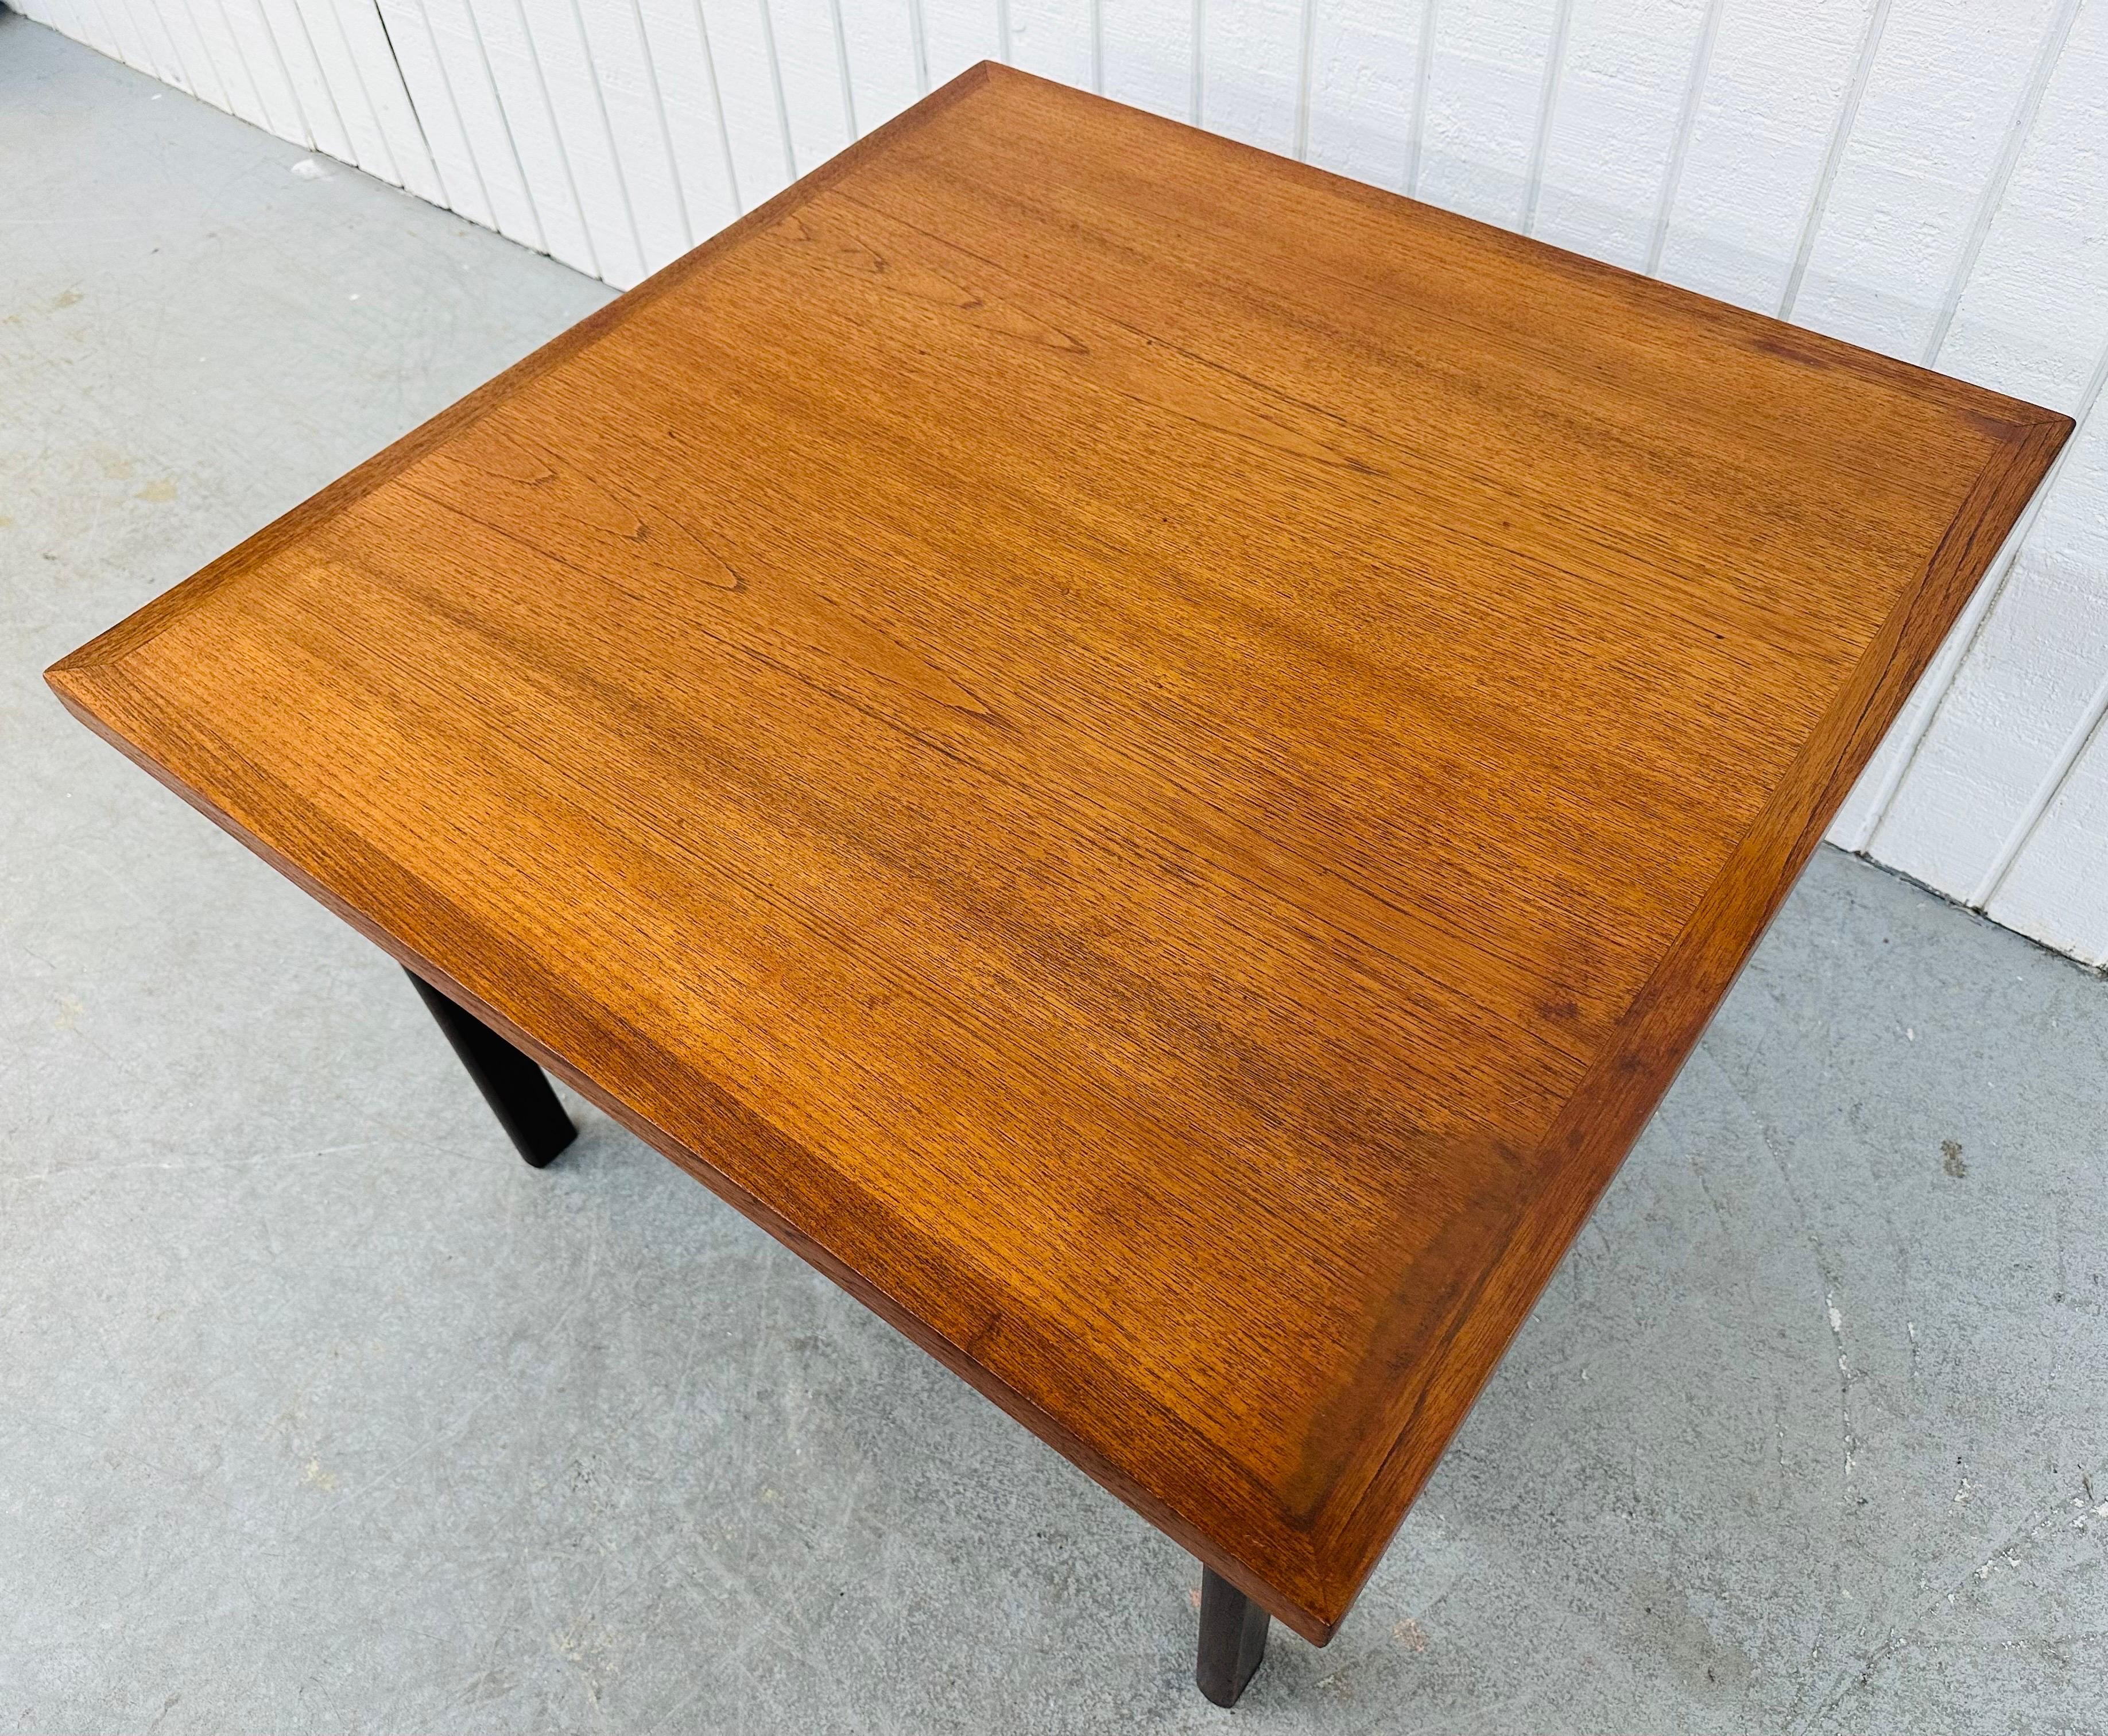 This listing is for a Mid-Century Modern Wegner Style Teak Coffee Table. Featuring a straight line design, bottom magazine shelf, four thick modern legs, and a beautiful teak finish. This is an exceptional combination of quality and design!